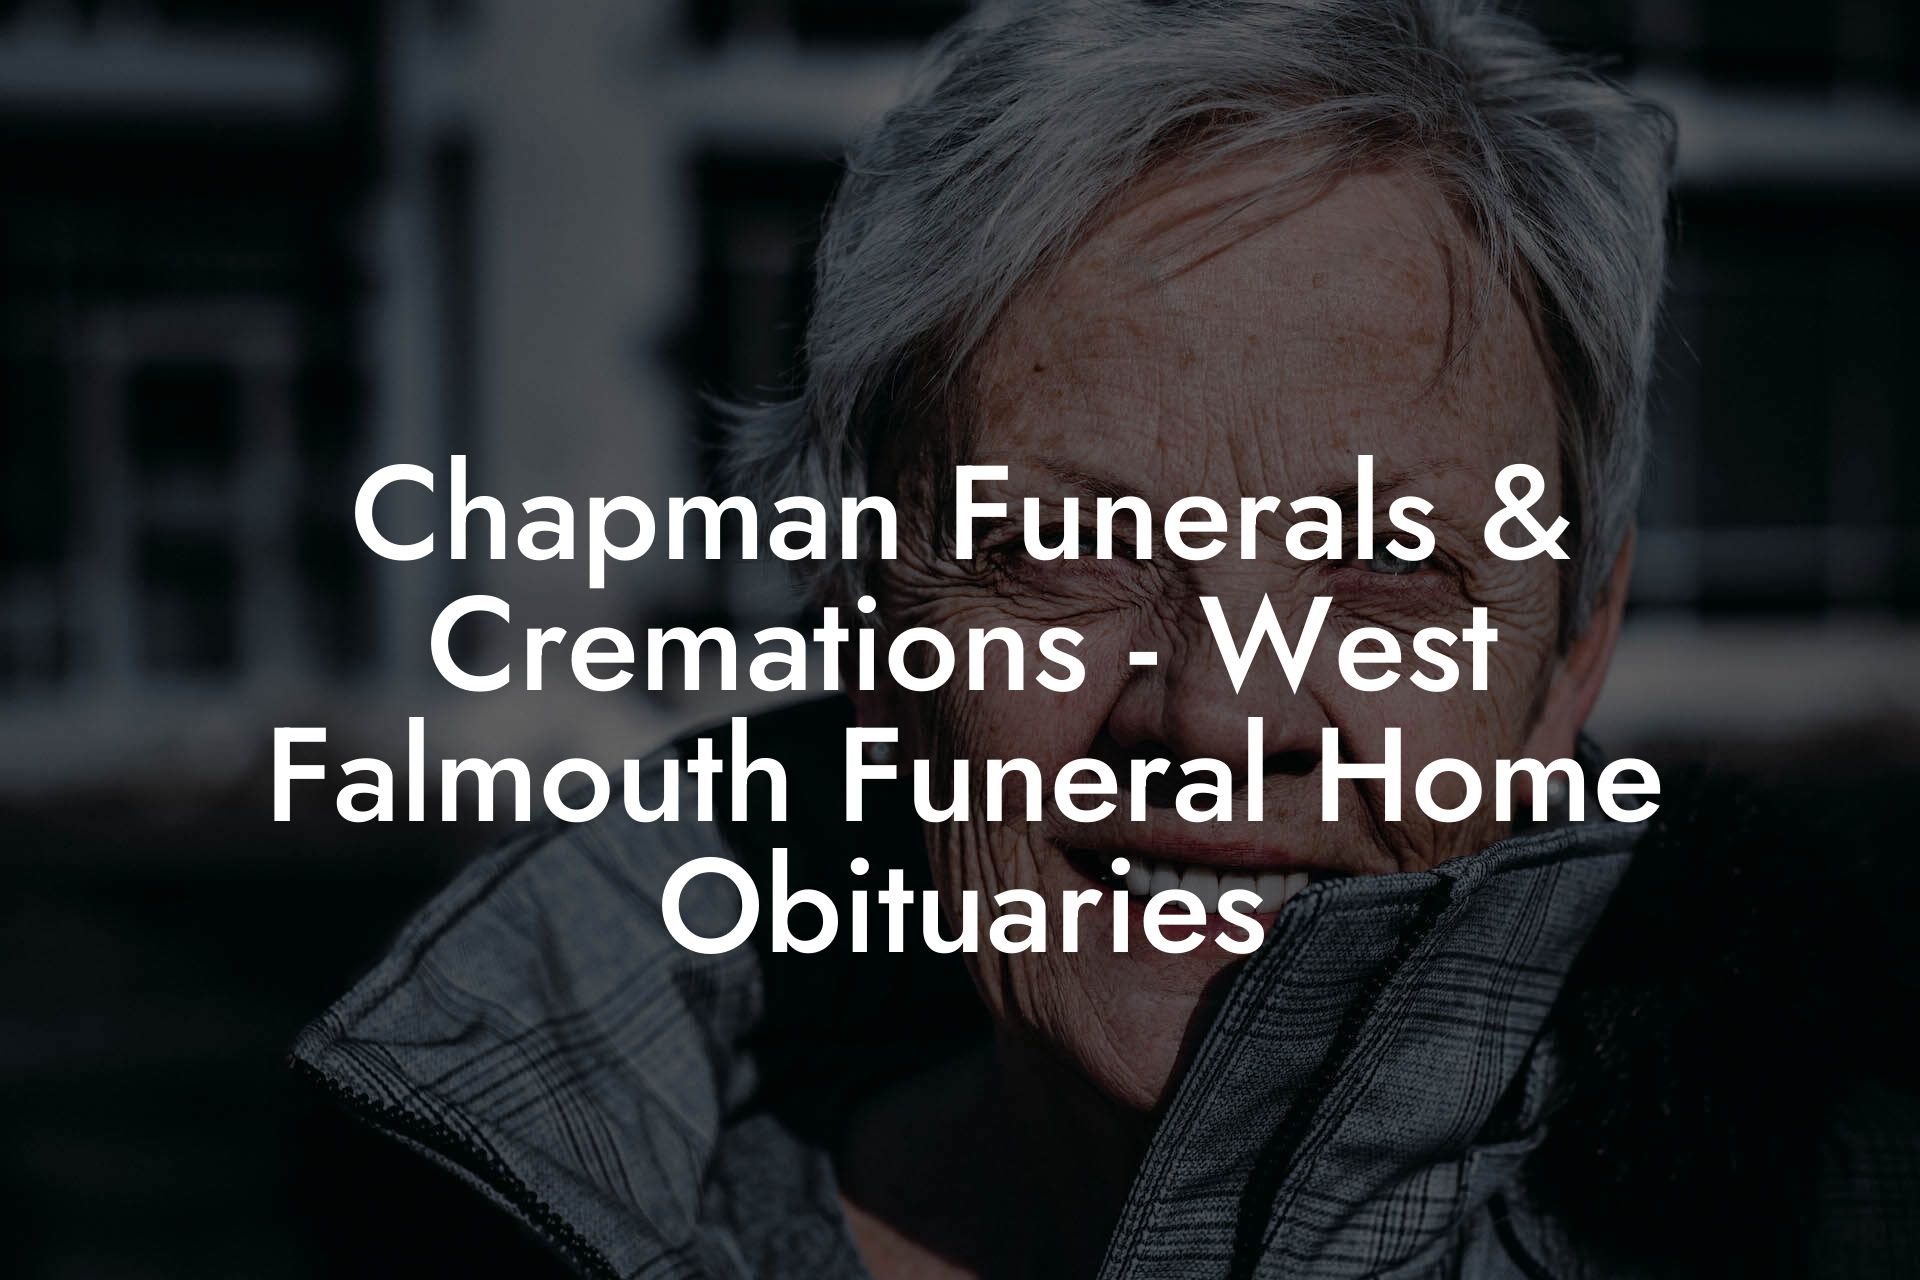 Chapman Funerals & Cremations - West Falmouth Funeral Home Obituaries